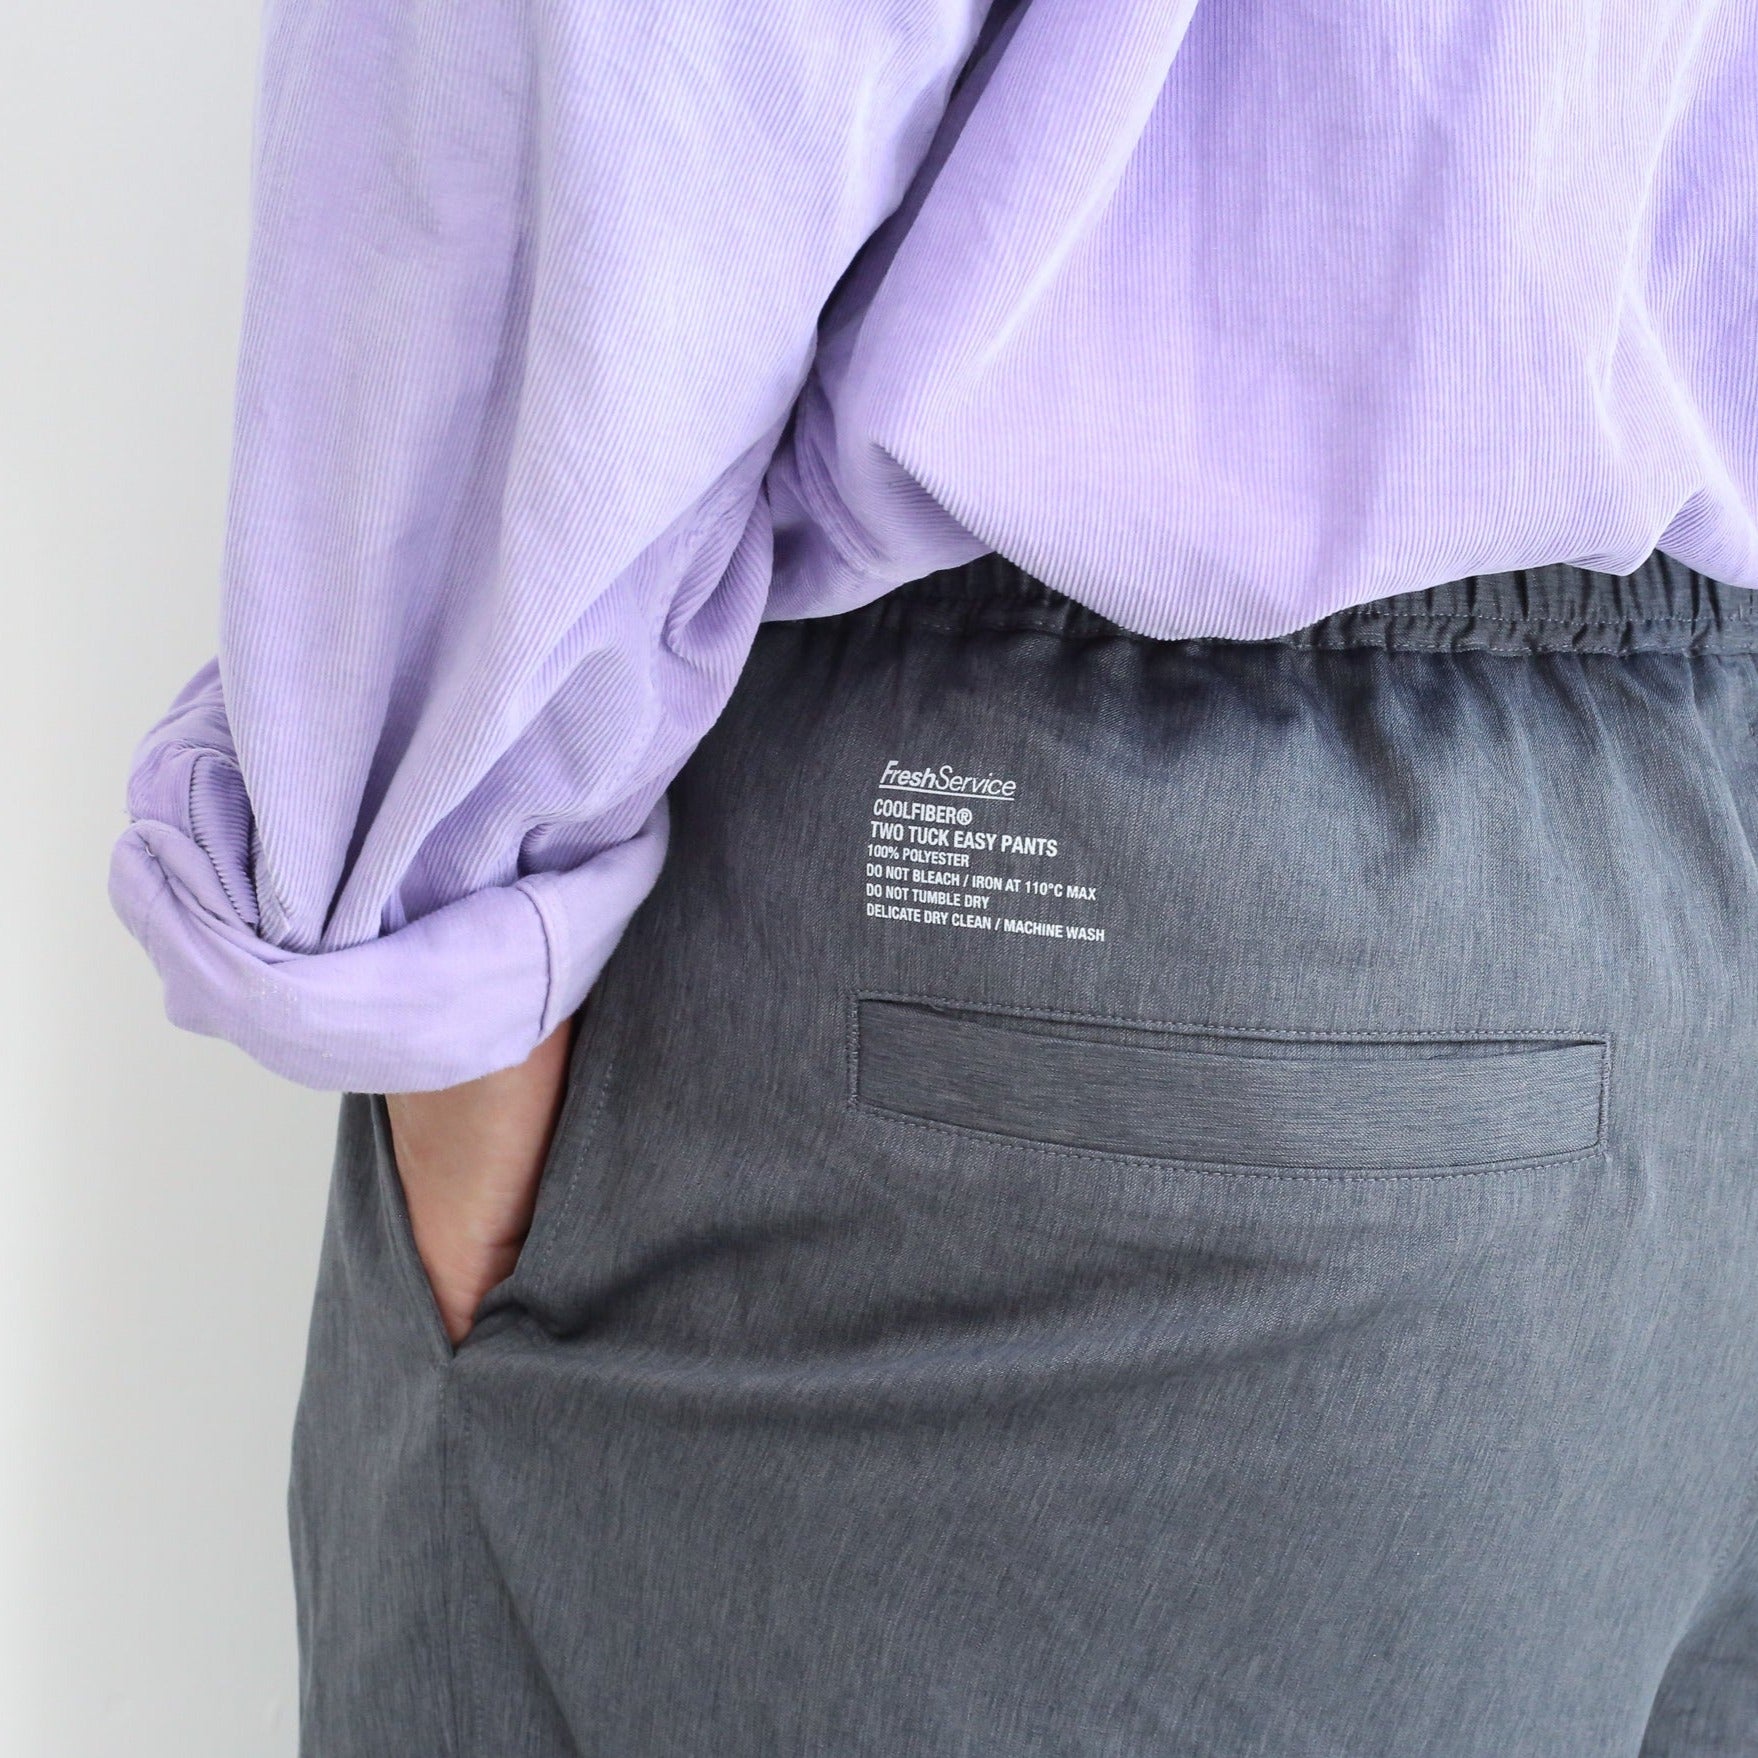 FreshService COOLFIBER TWO TUCK EASY PANTS 